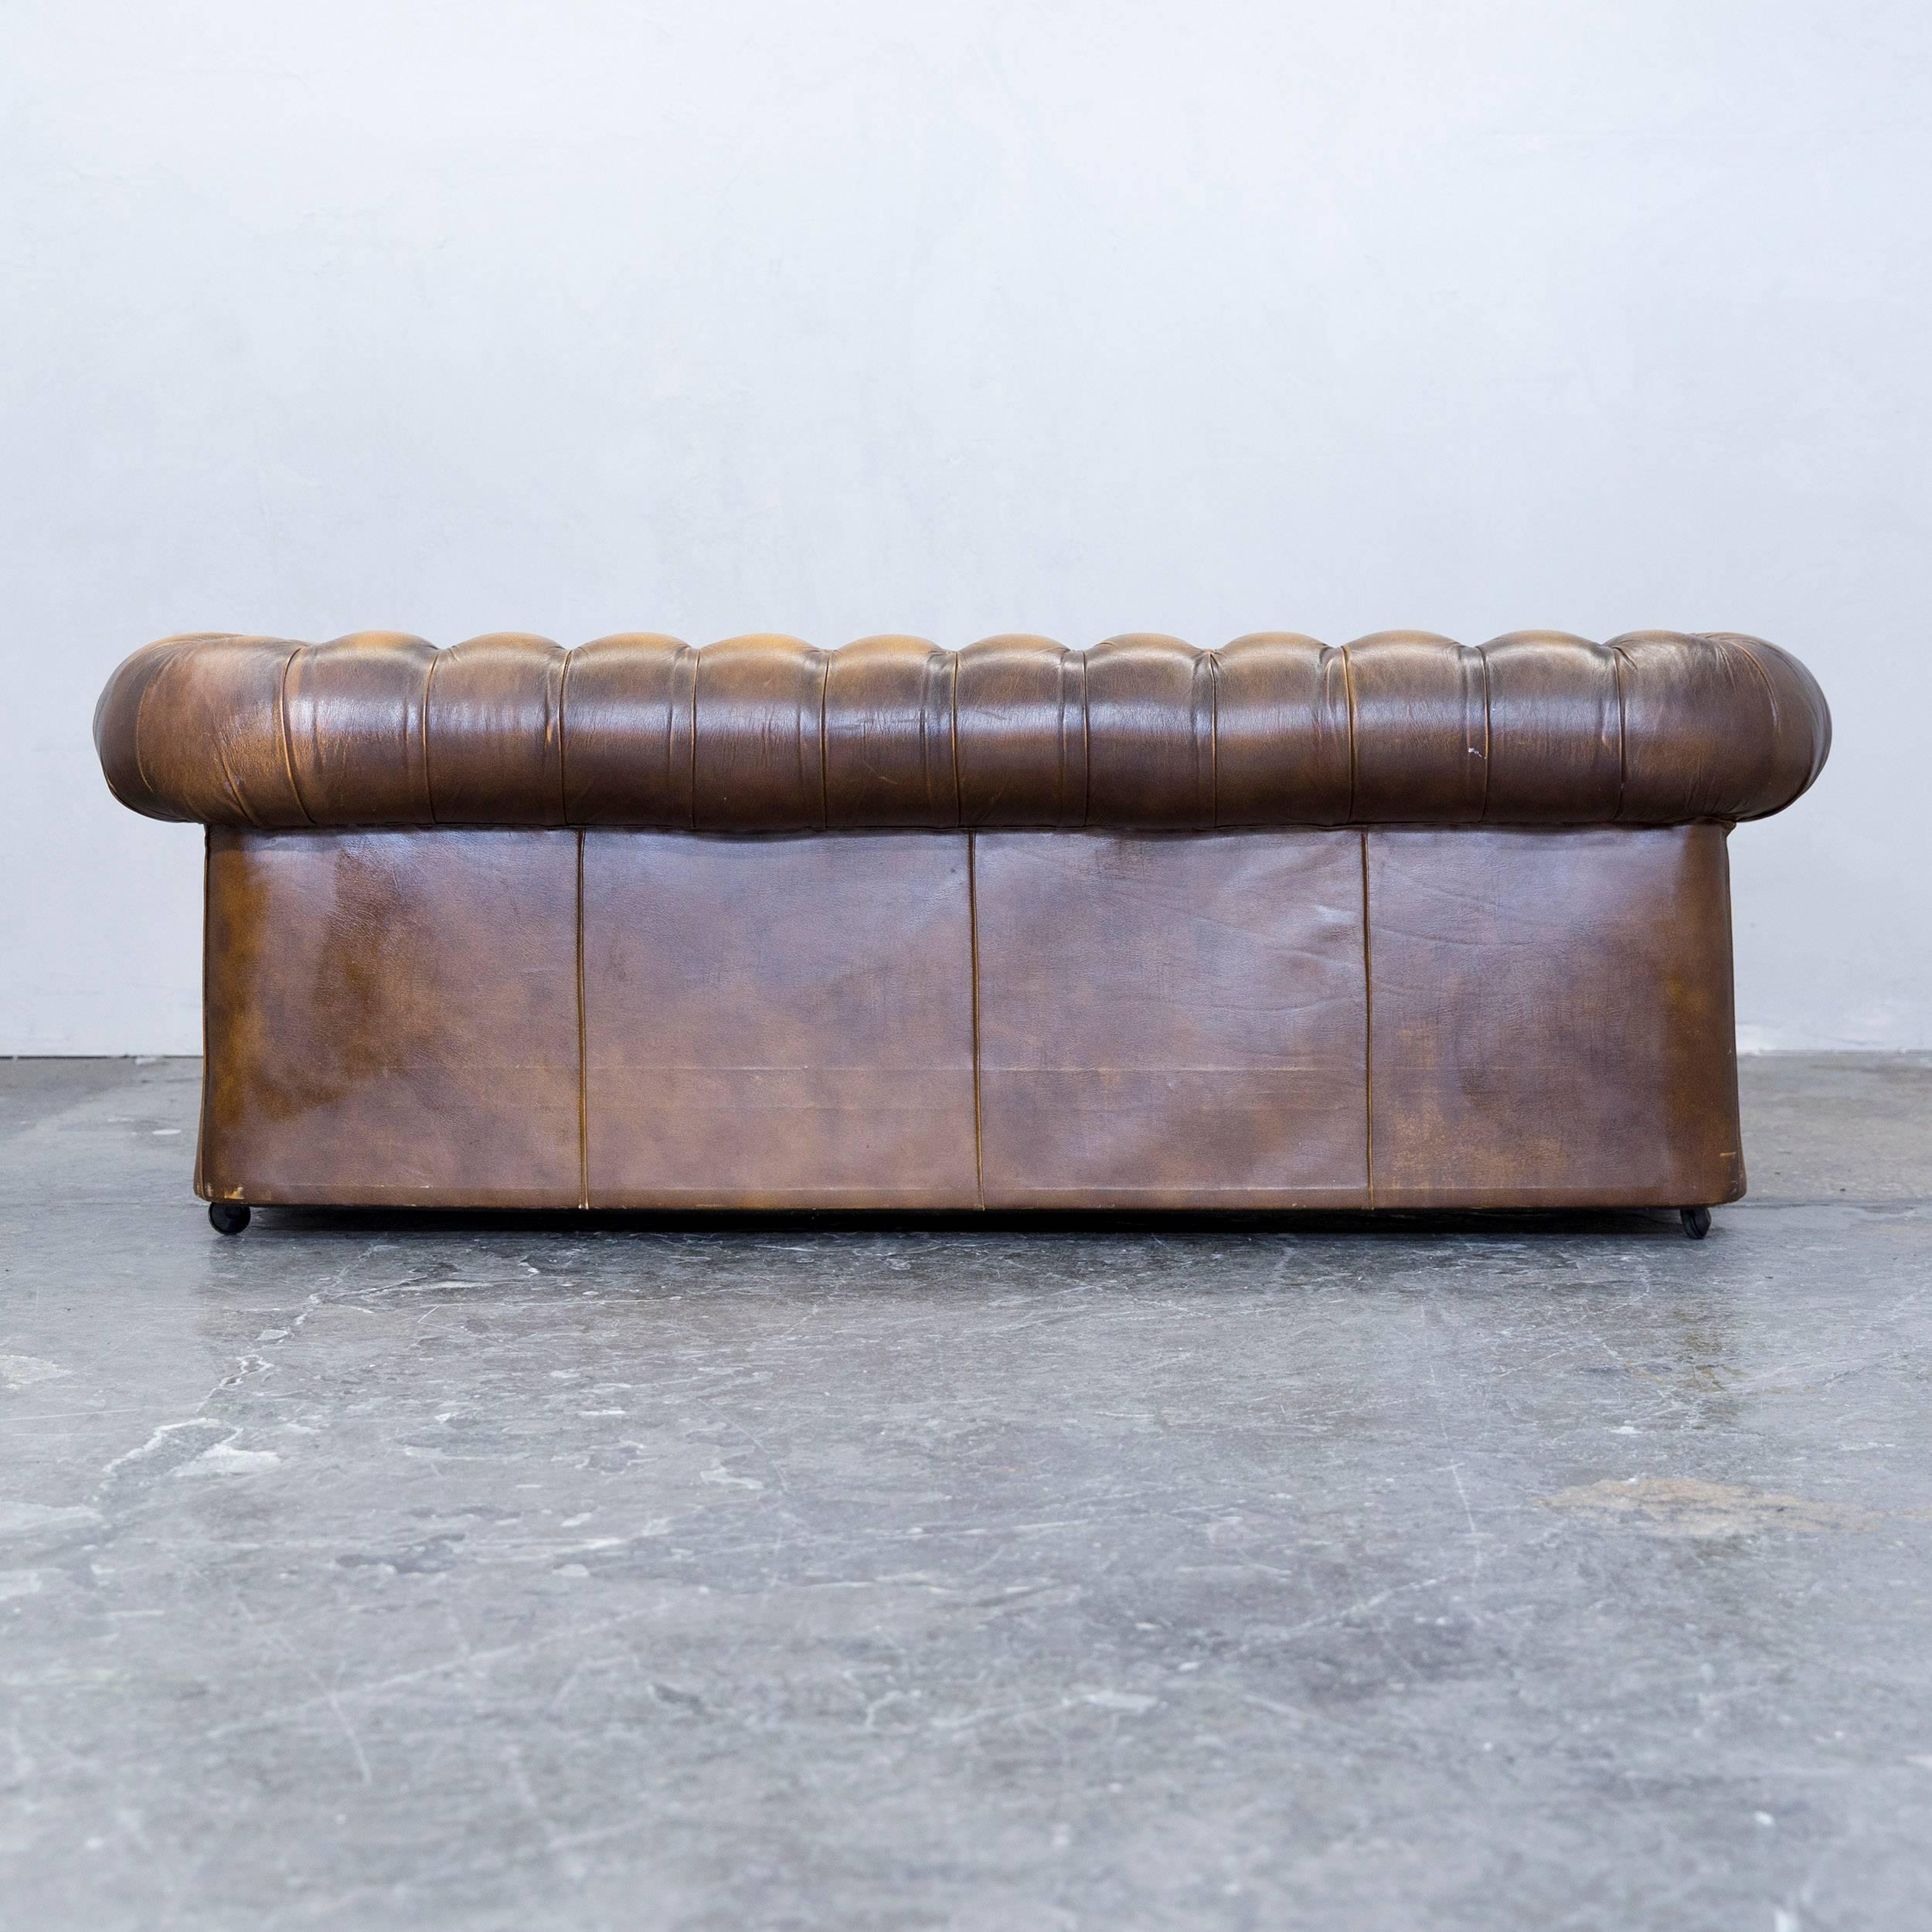 Thomas Lloyd Chesterfield Leather Sofa Ocre Brown Three-Seat Couch Retro Vintage 1